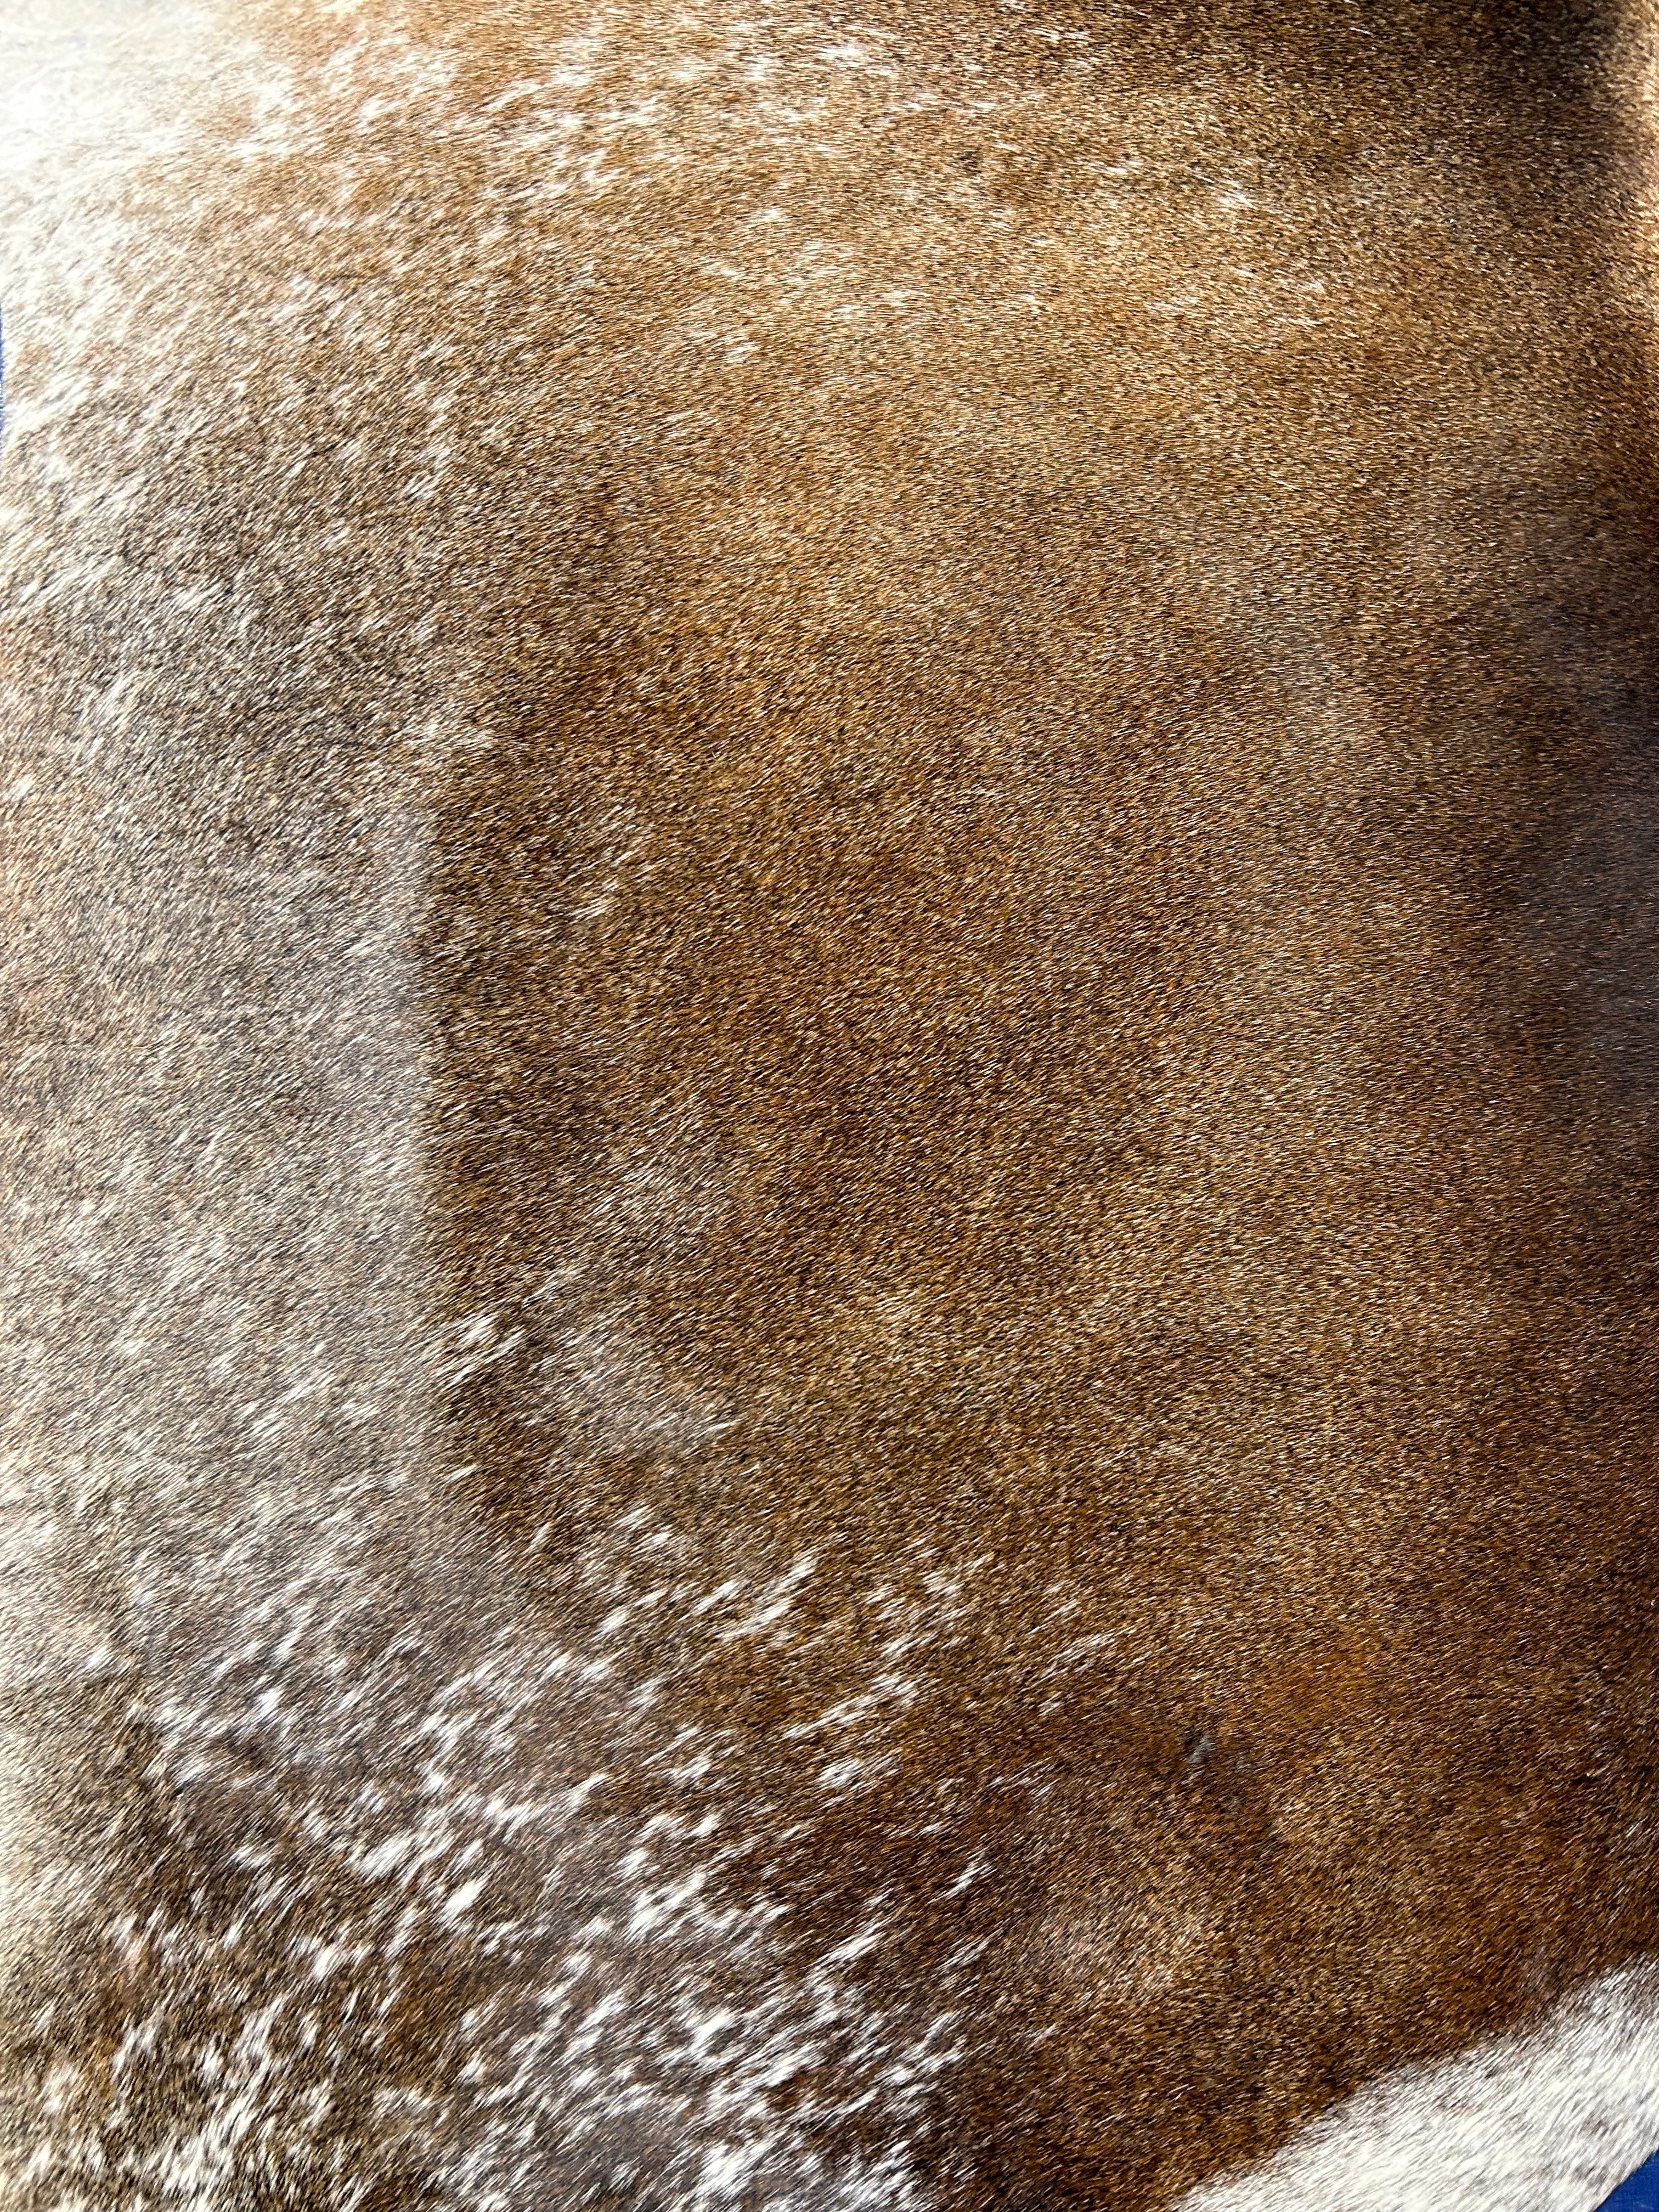 Gorgeous Speckled Reddish Cowhide Rug (hard to see stitches) Size: 6x6 feet M-1690